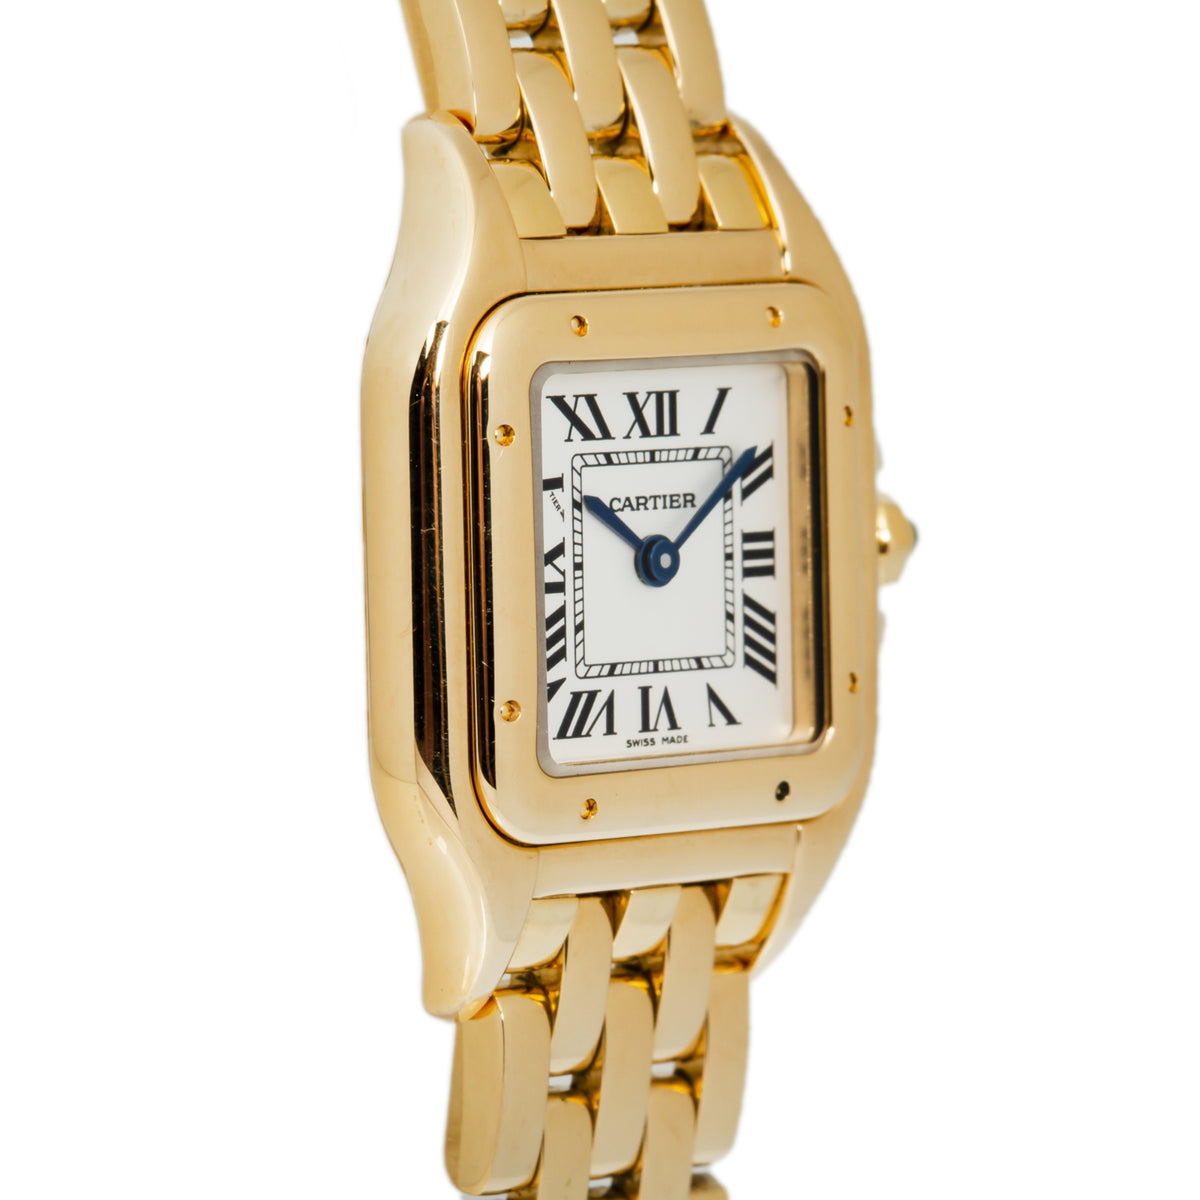 Cartier Panthere WGPN0008 4020 18k Yellow Gold Quartz Ladie's Watch 22mm